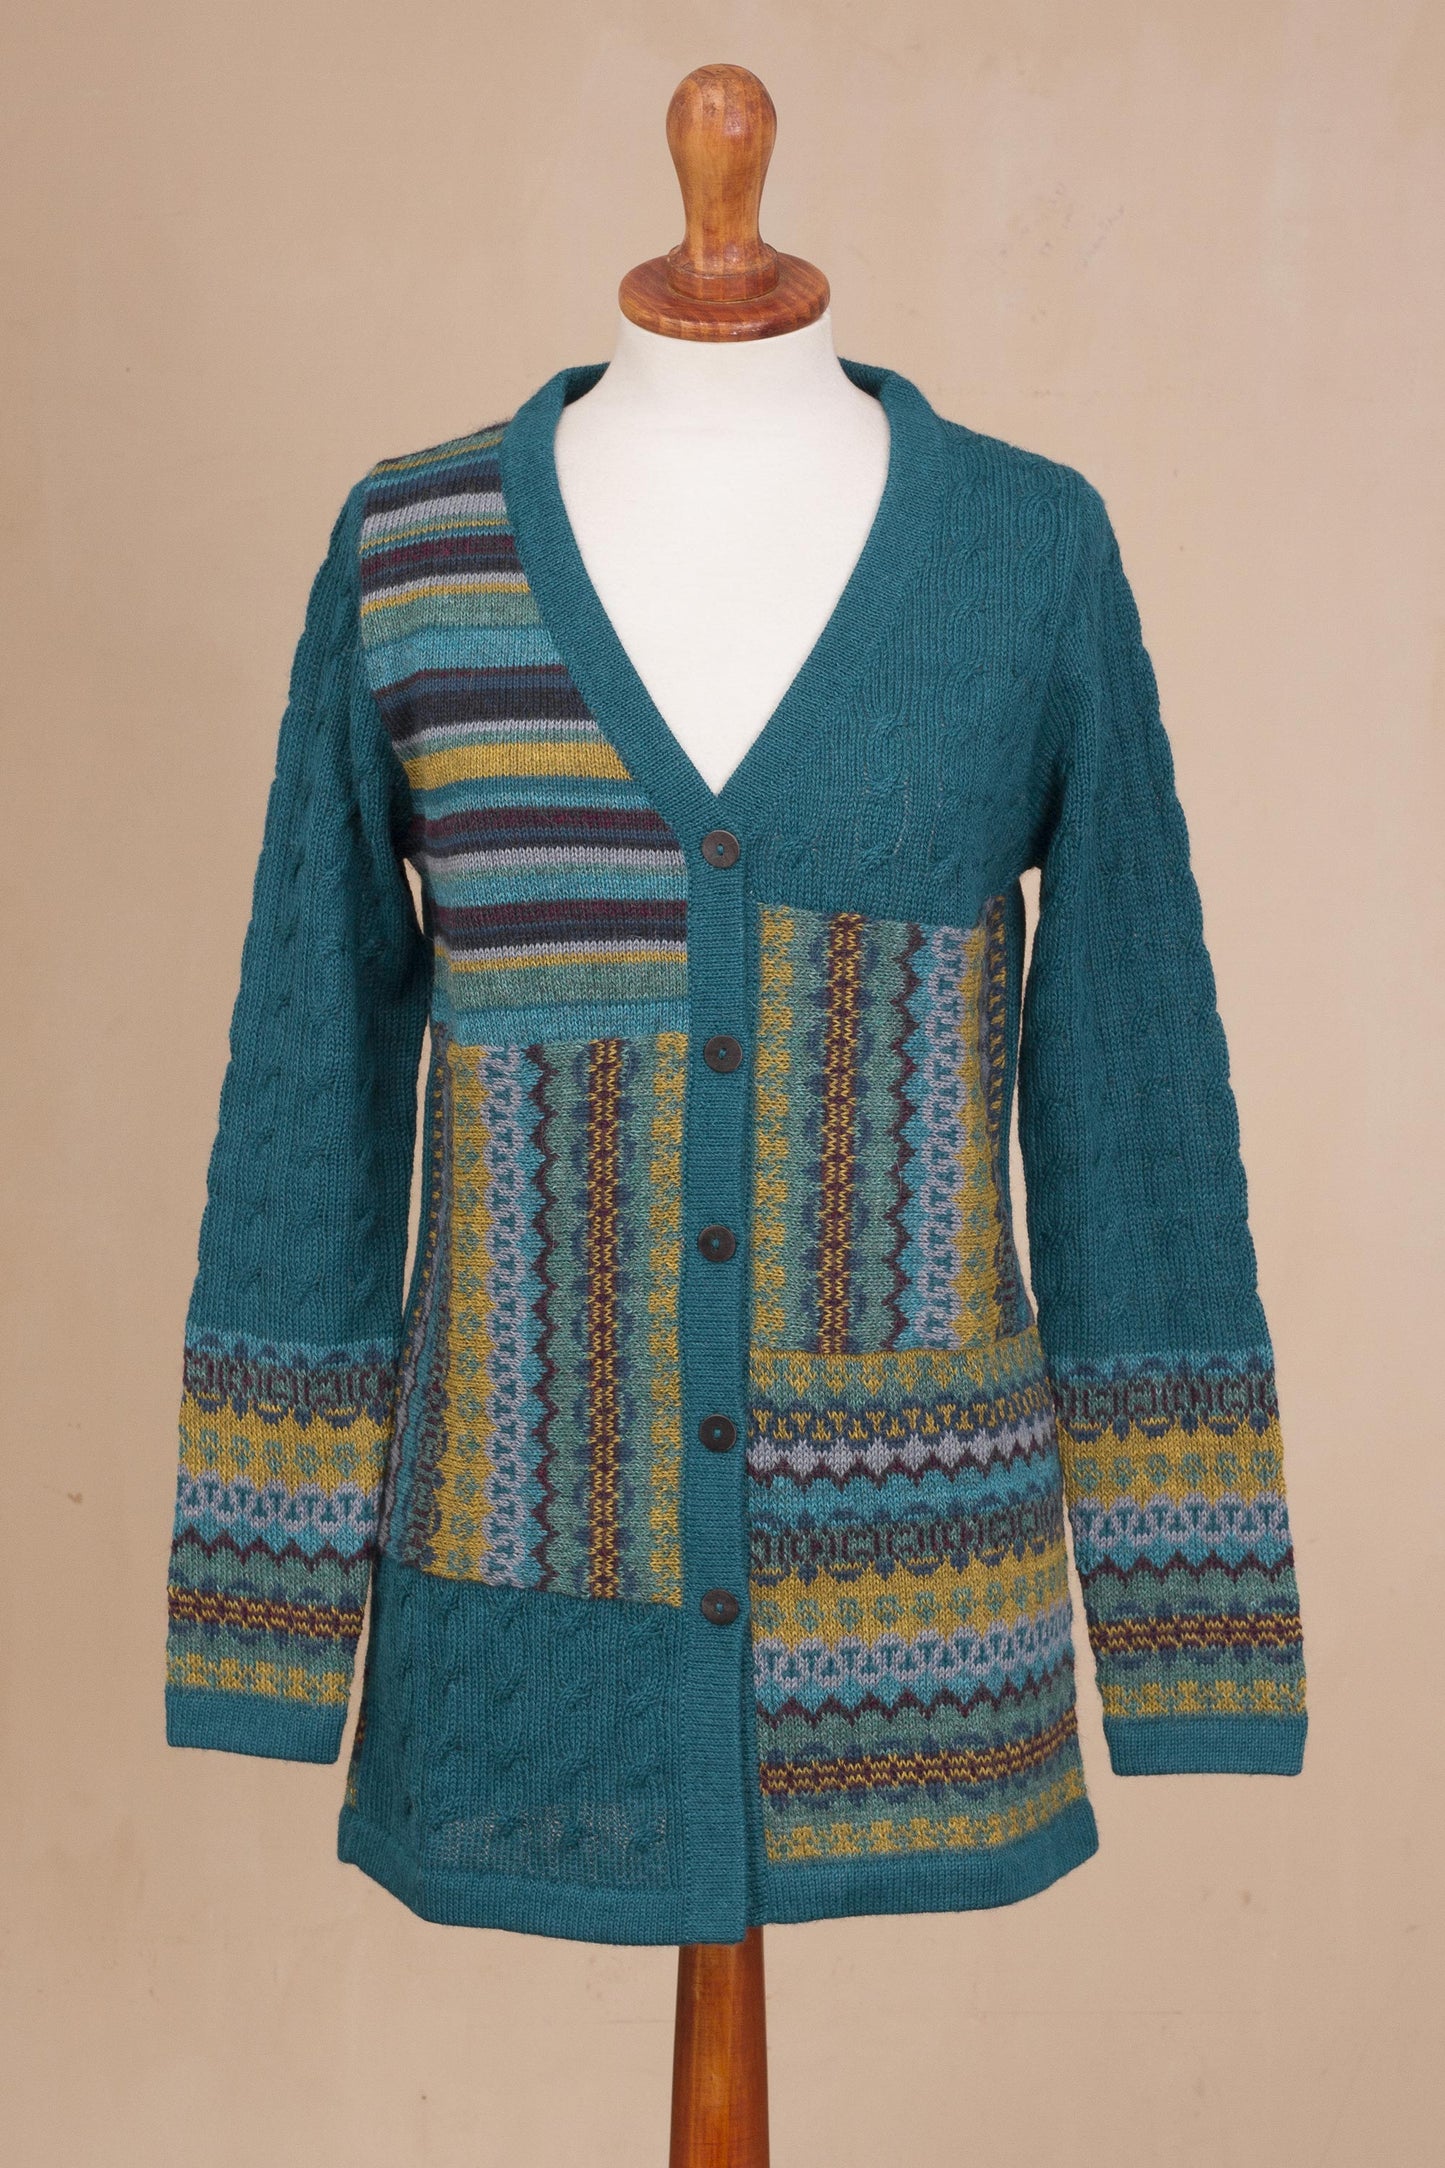 Patchwork in Teal Cable Knit 100% Alpaca Cardigan in Teal from Peru